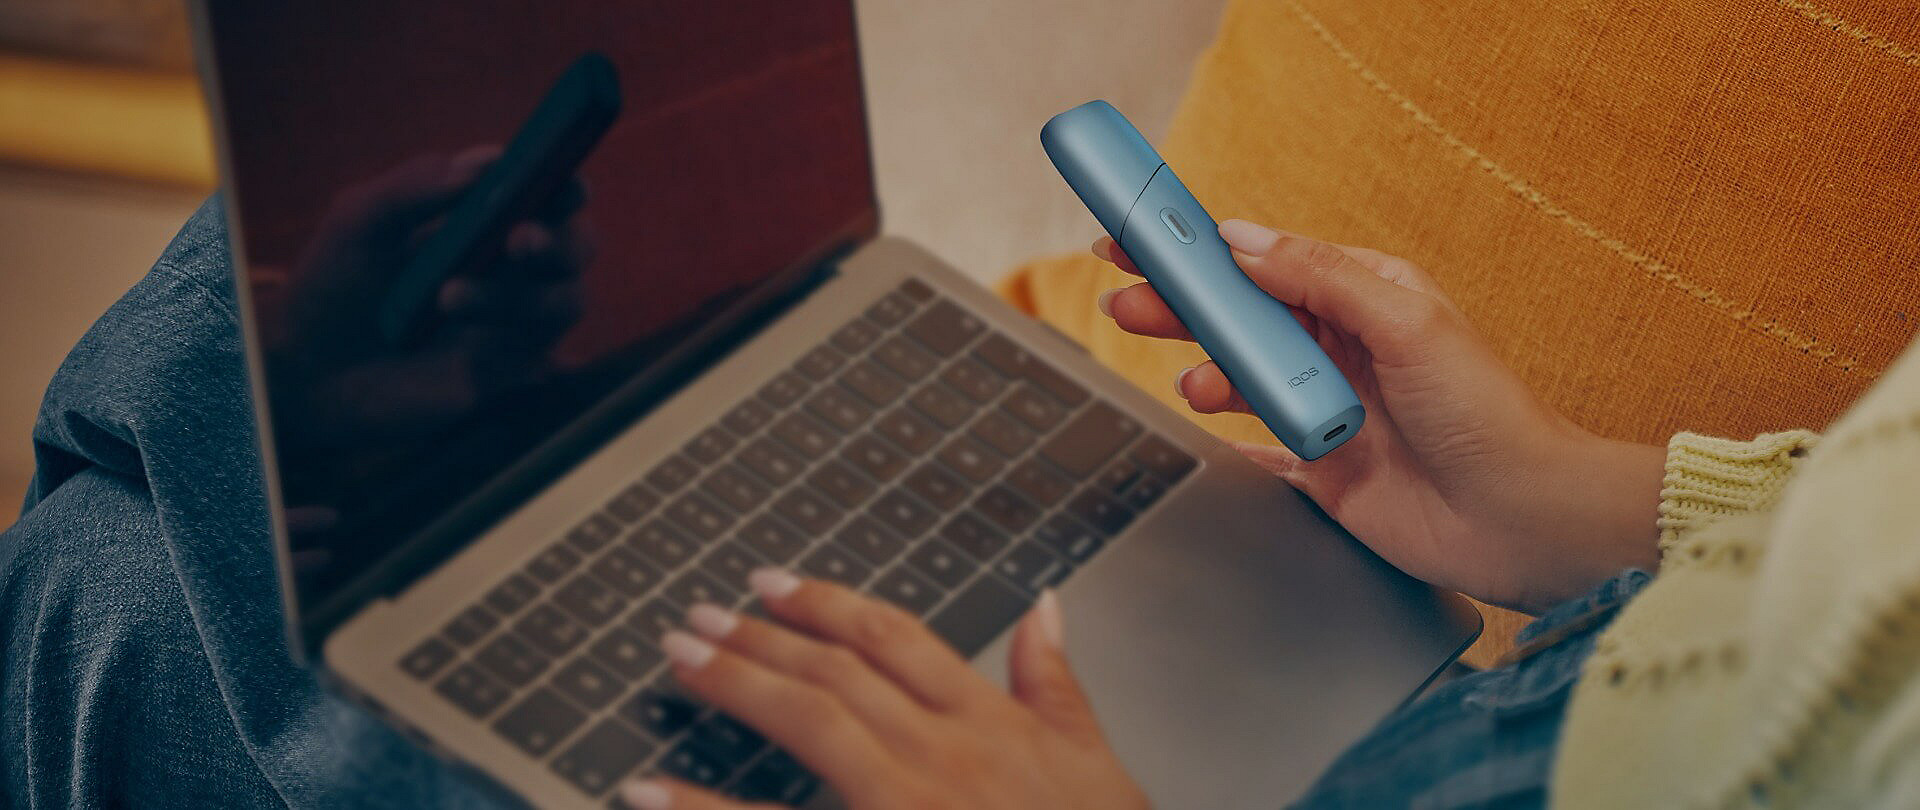 Woman holding an IQOS Originals ONE heated tobacco device and typing on laptop